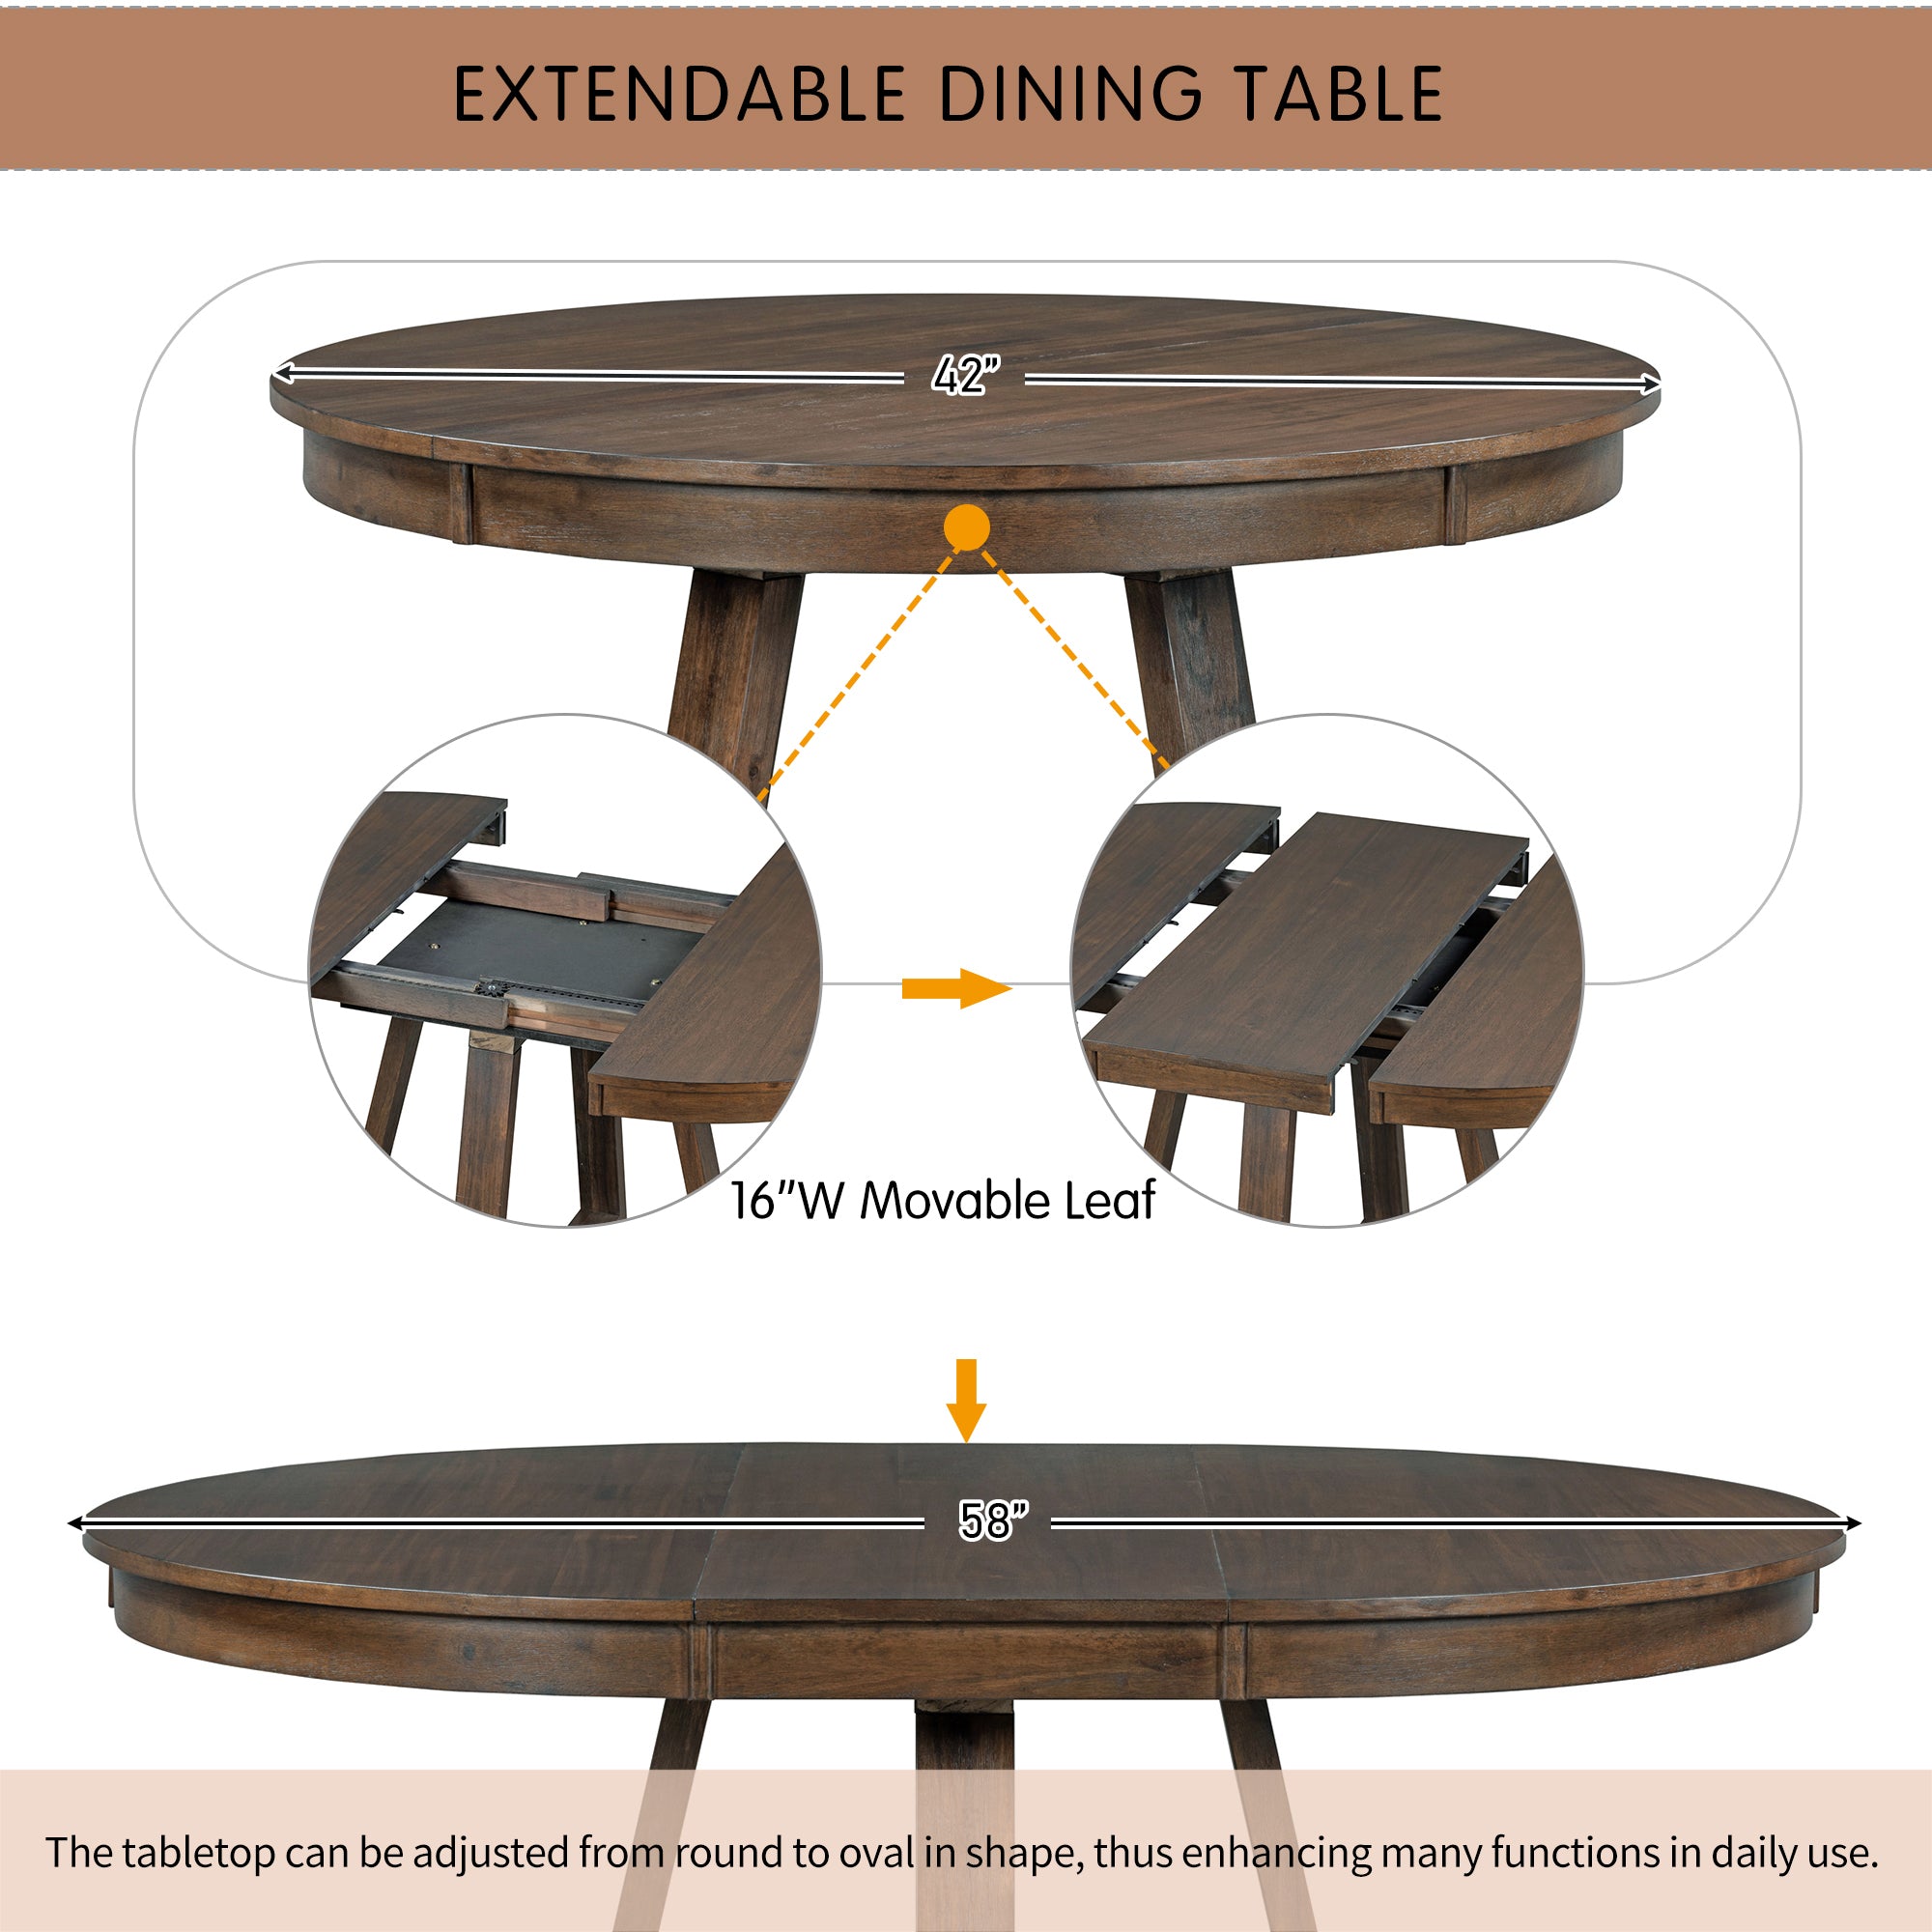 5 Piece Retro Functional Dining Set, Round Table walnut-solid wood